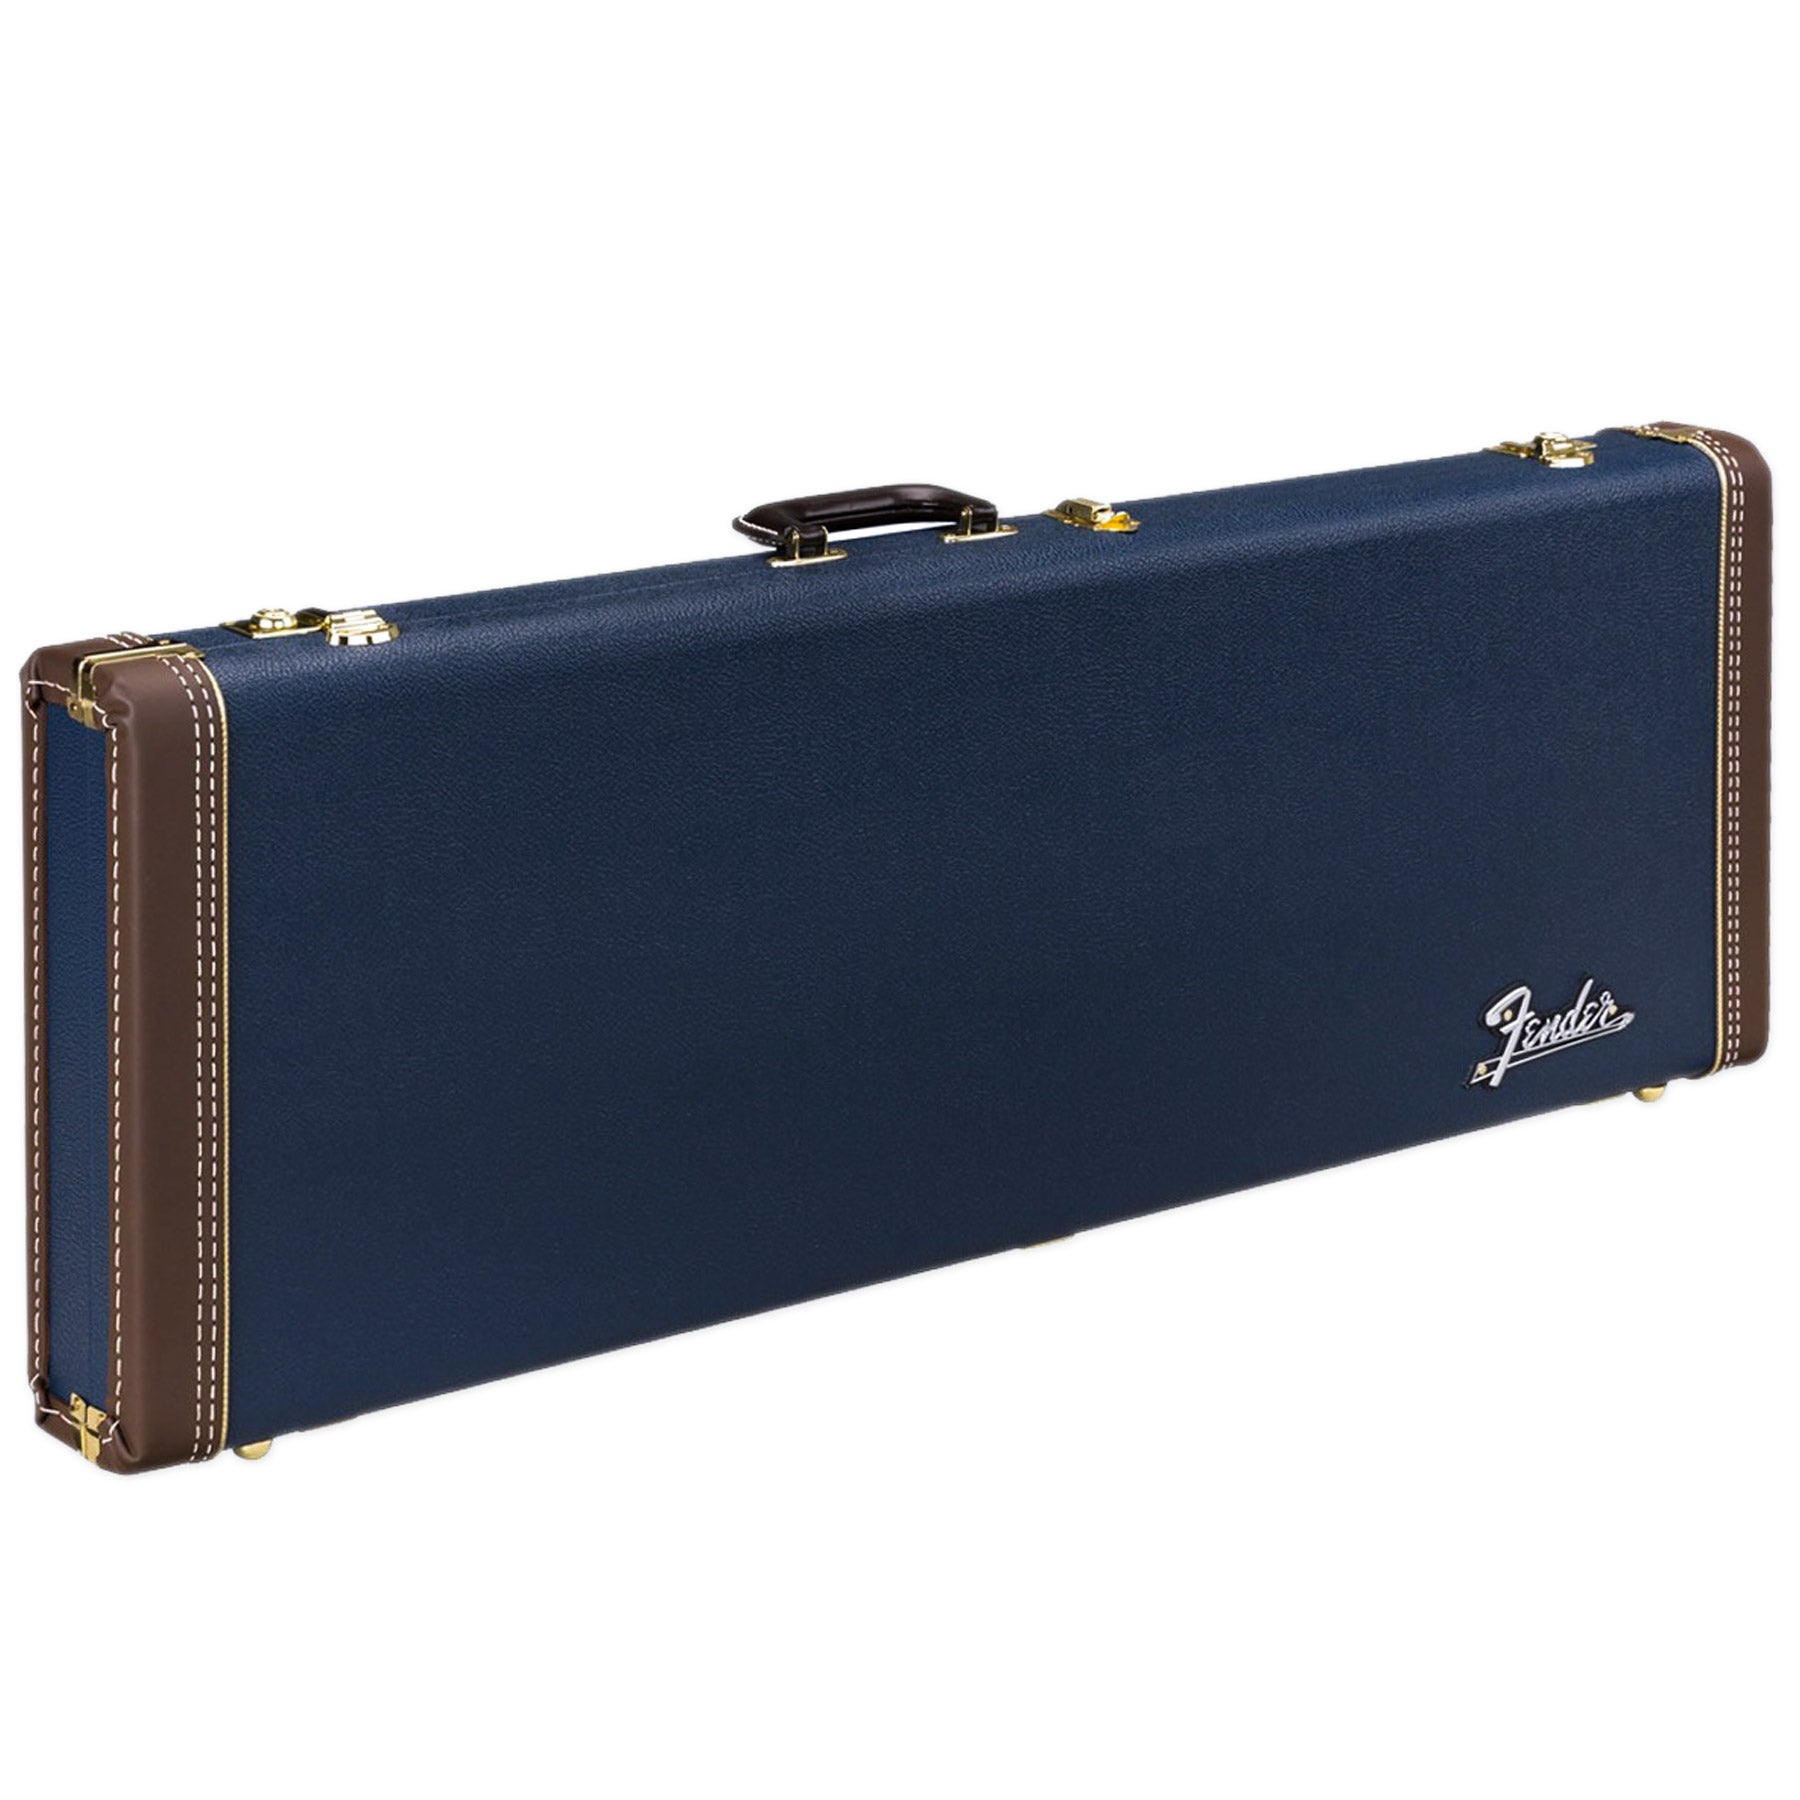 FENDER CLASSIC SERIES WOOD CASE FOR STRAT OR TELE, NAVY BLUE